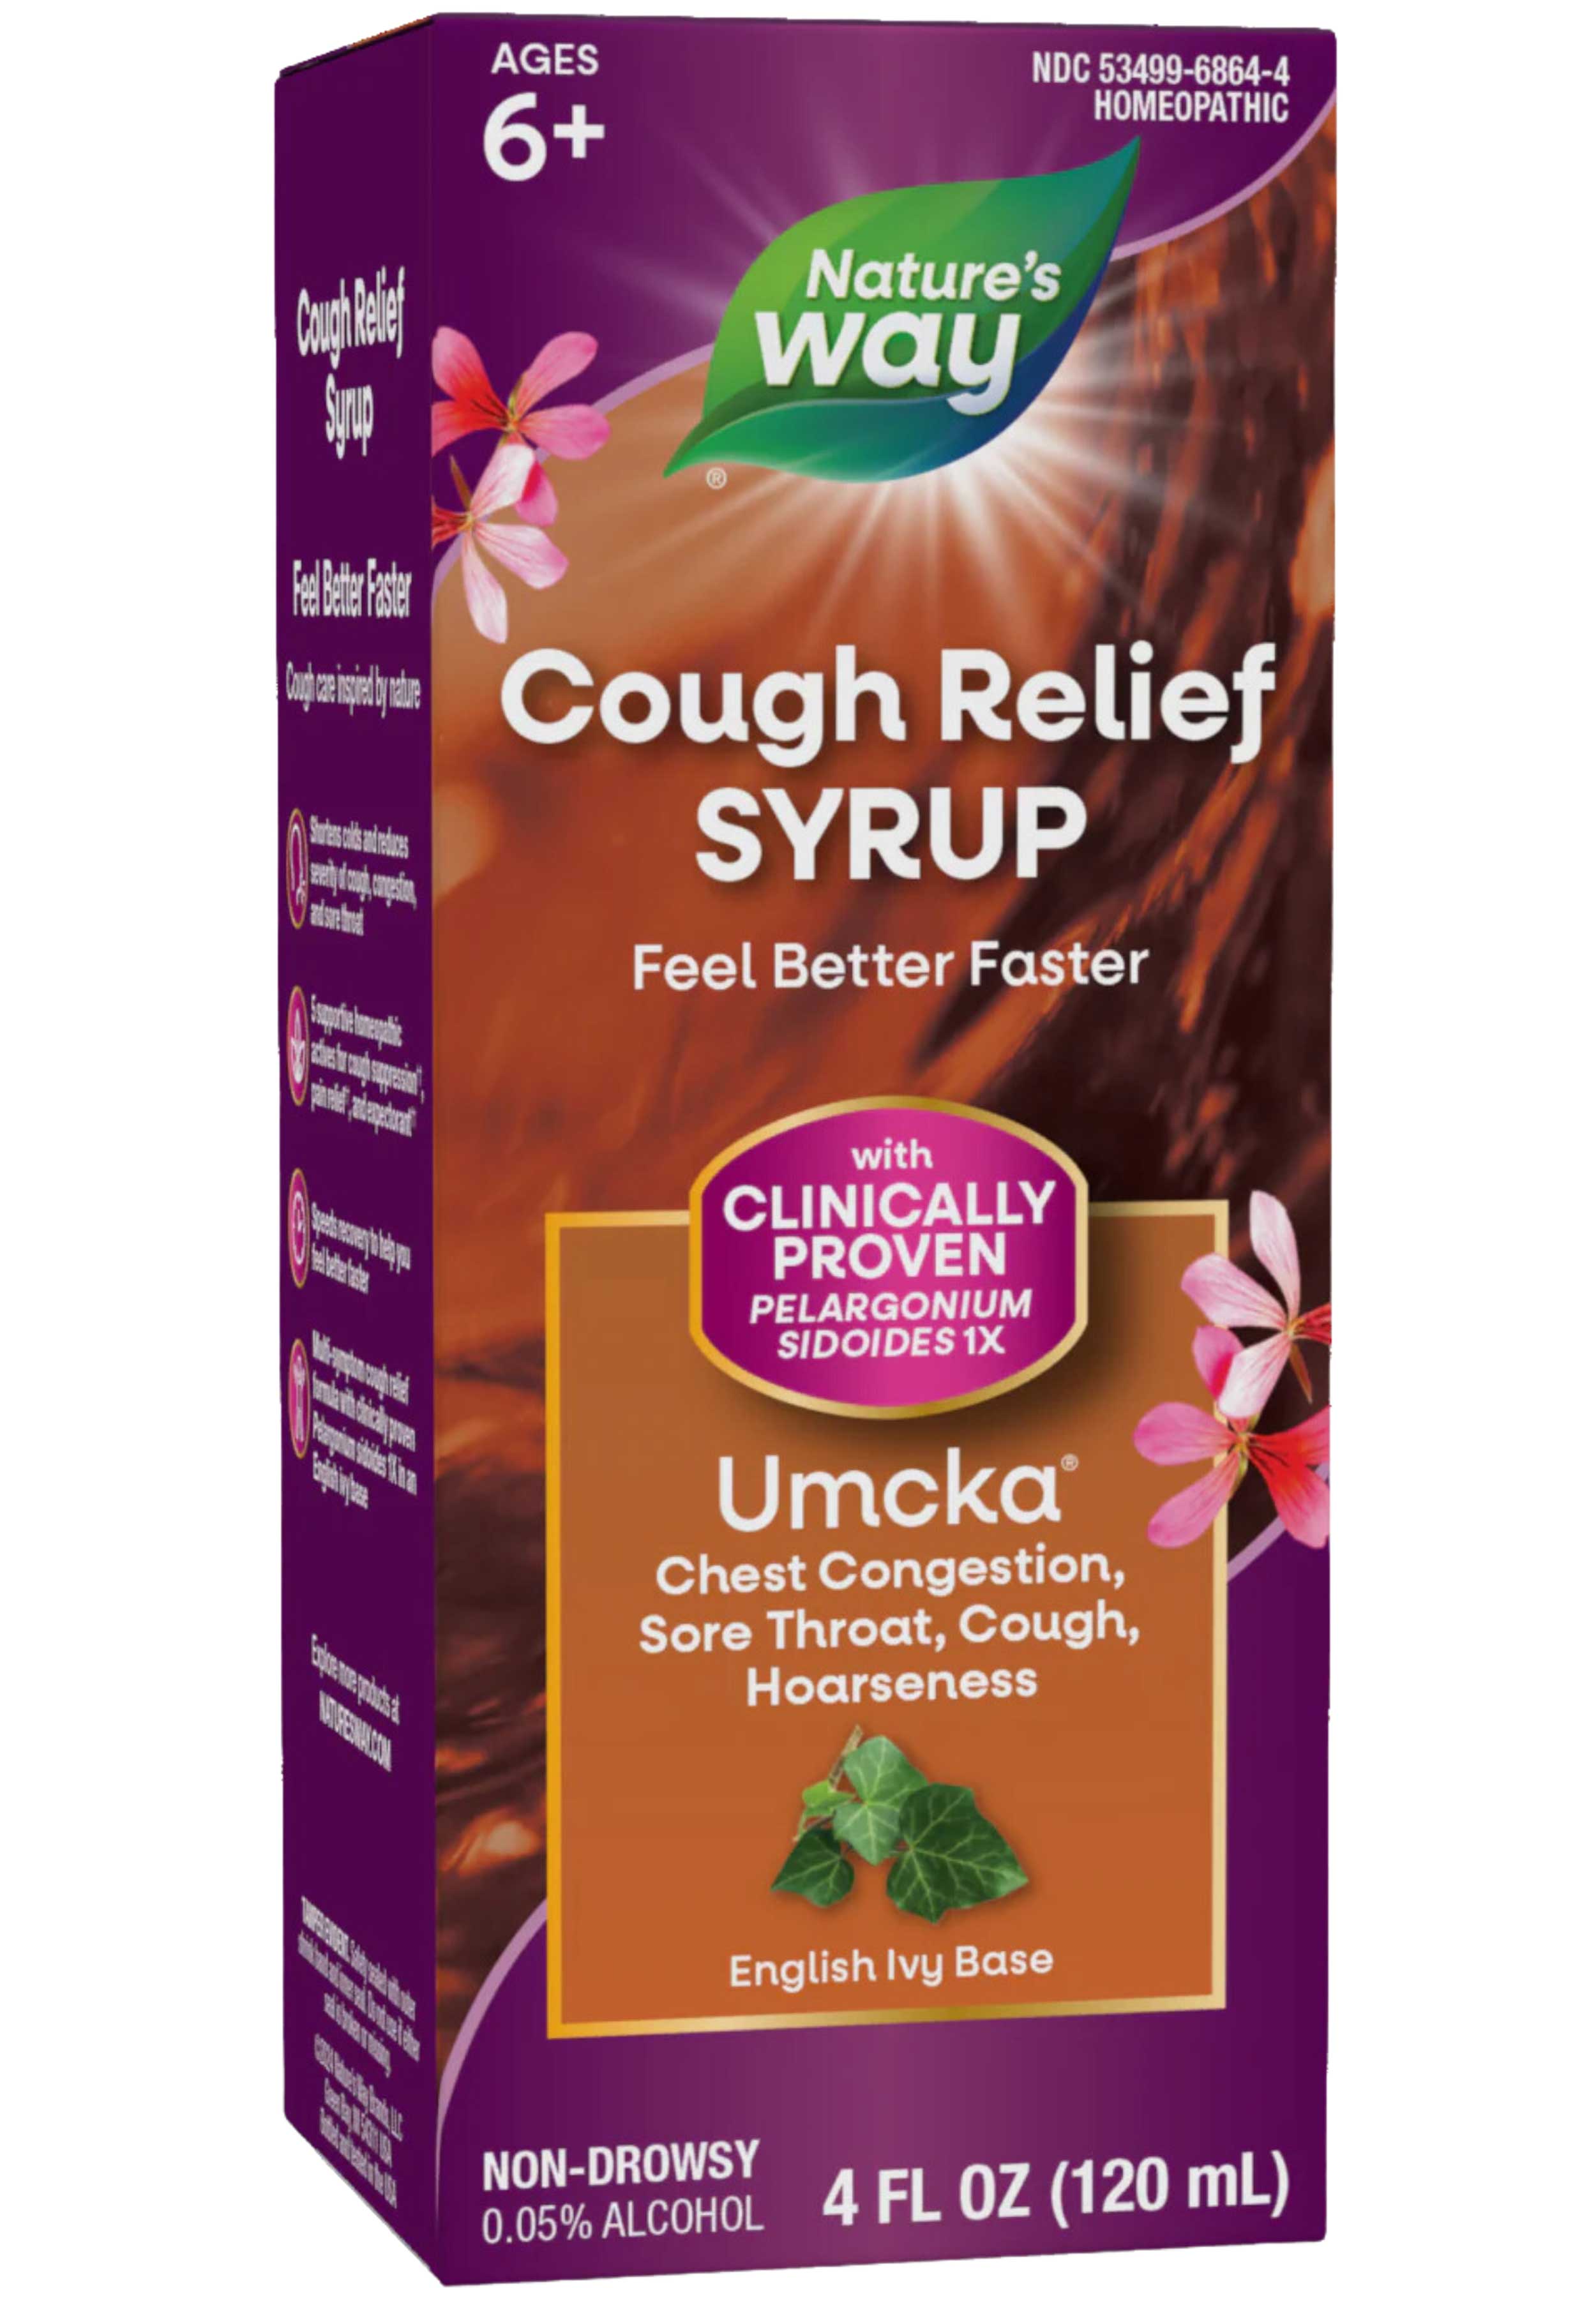 Nature's Way Cough Relief Syrup